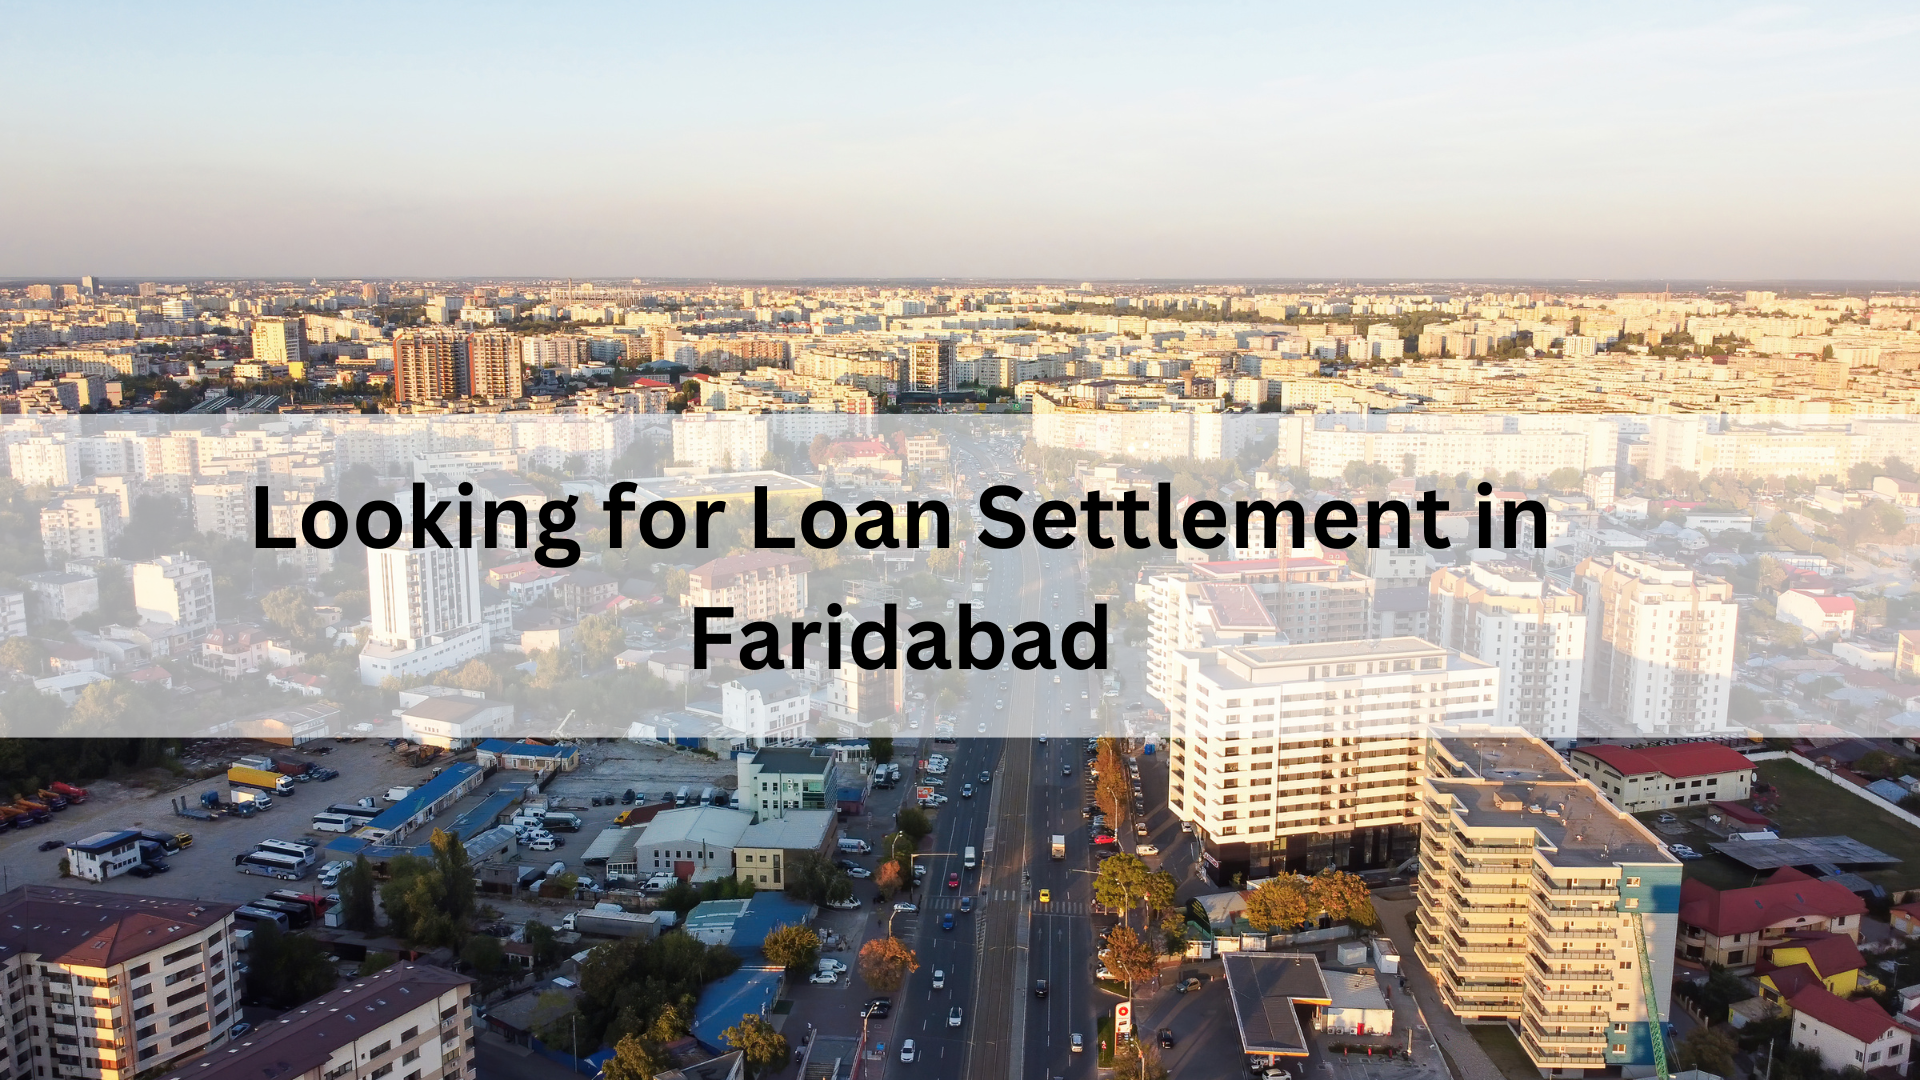 Looking for Loan Settlement in Faridabad